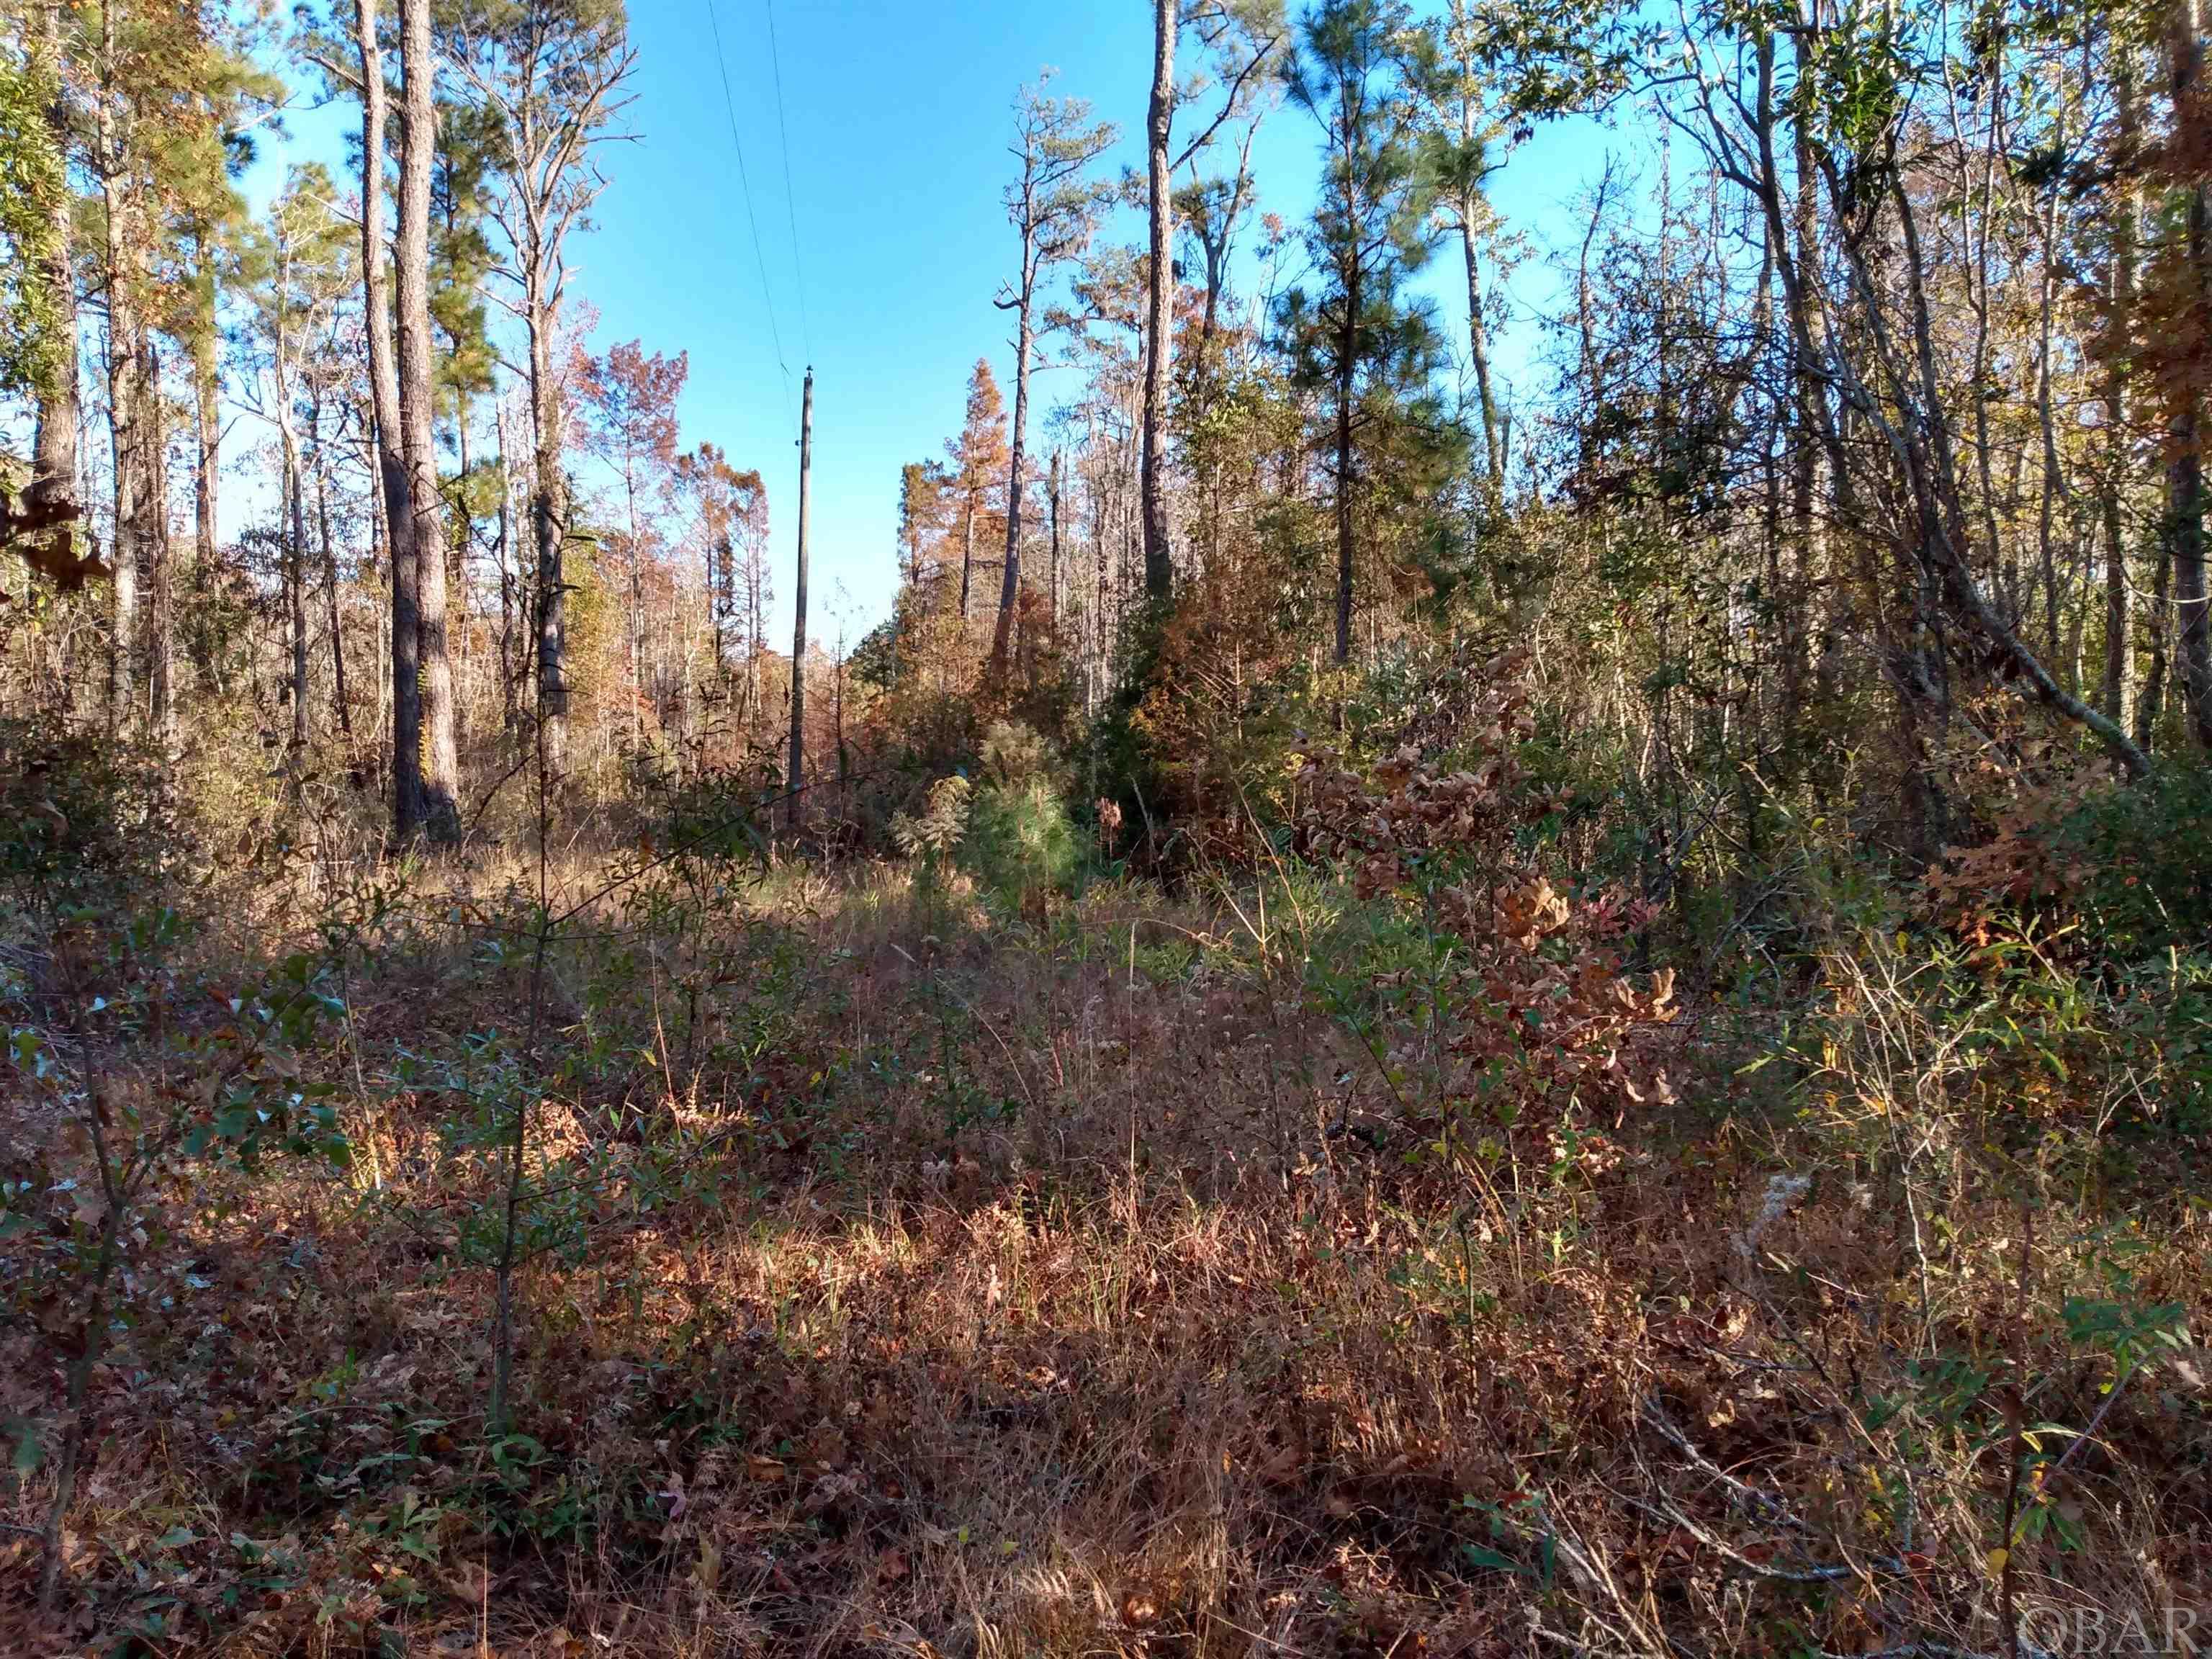 Partially wooded 1 acre residential lot in Tyrrell County, N.C. No restrictions! Electrical power and municipal water are available. Soils are believed to be suitable for conventional septic systems. Located along Riverneck Road this is an elongated lot with easy access. Excellent site for a mobile home or camper. Ideal for weekend stays or a stopping destination en route to the exciting N.C. Outer Banks! Great opportunity to take advantage of the abundant marine and wildlife resources in the area! Located 4 miles northwest of Columbia, N.C. Price to sell quickly at only $15,000!